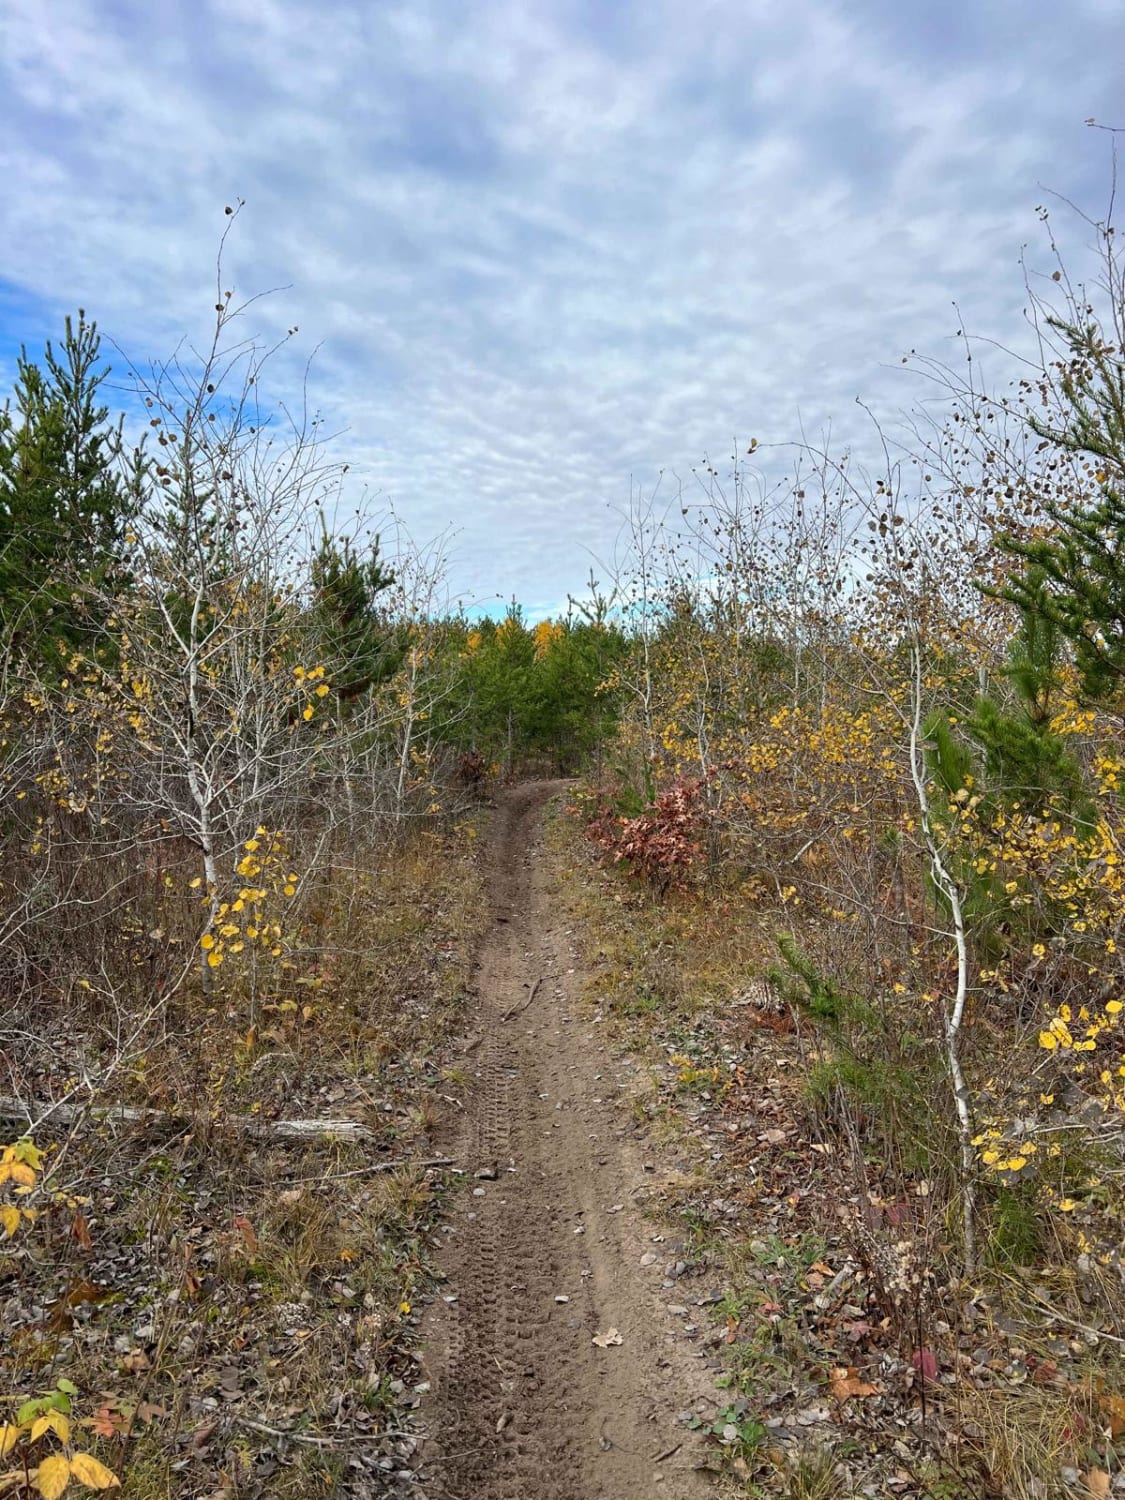 Crow Wing River Single Track